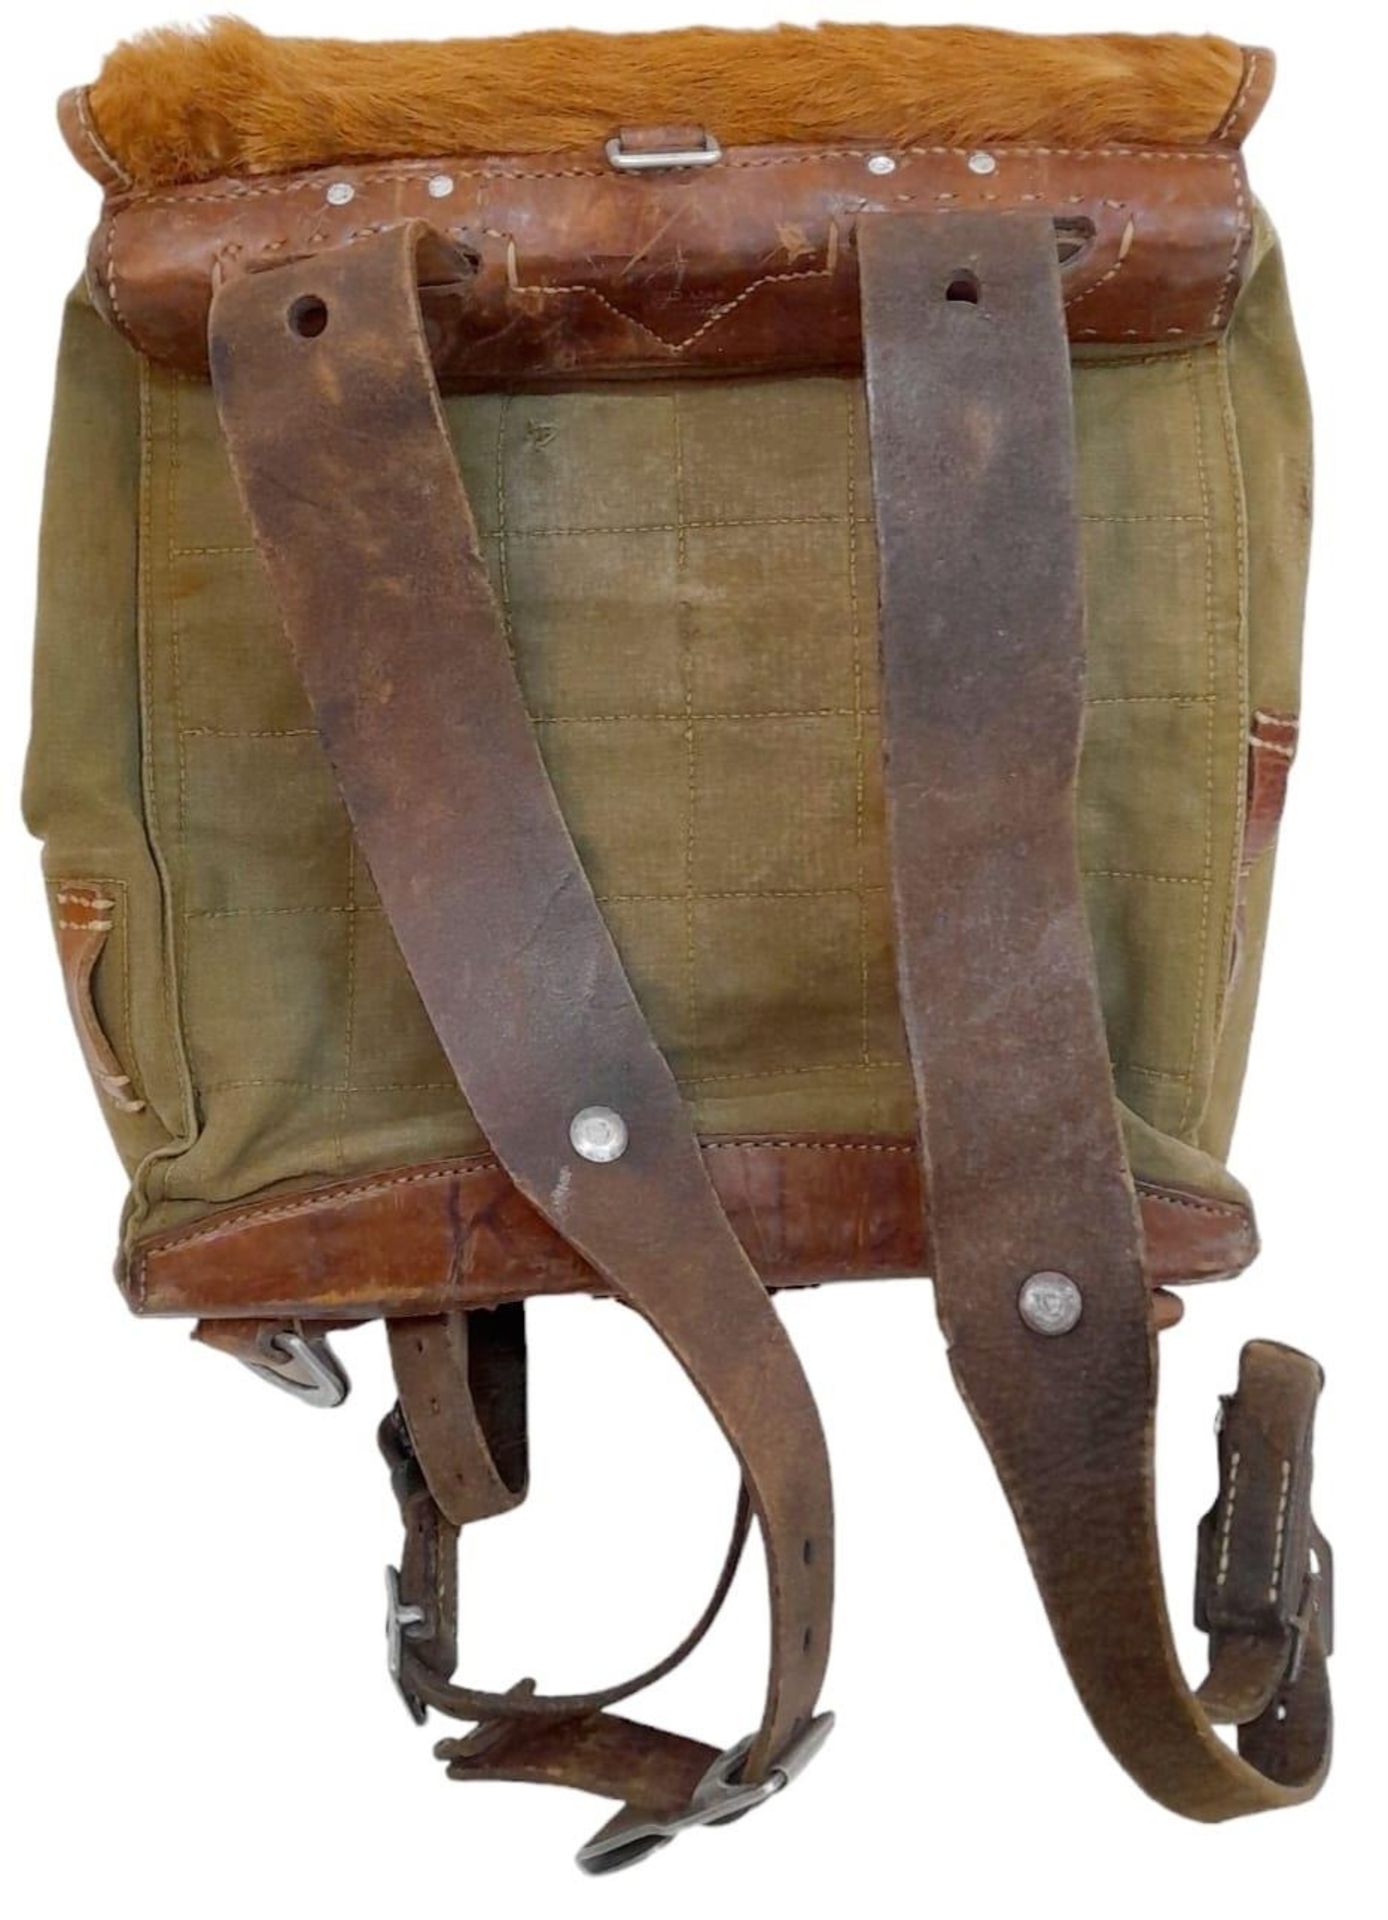 WW2 German Tournister “Pony Pack” Dated 1939. Used by the Hitler Youth and ground troops. - Image 6 of 7